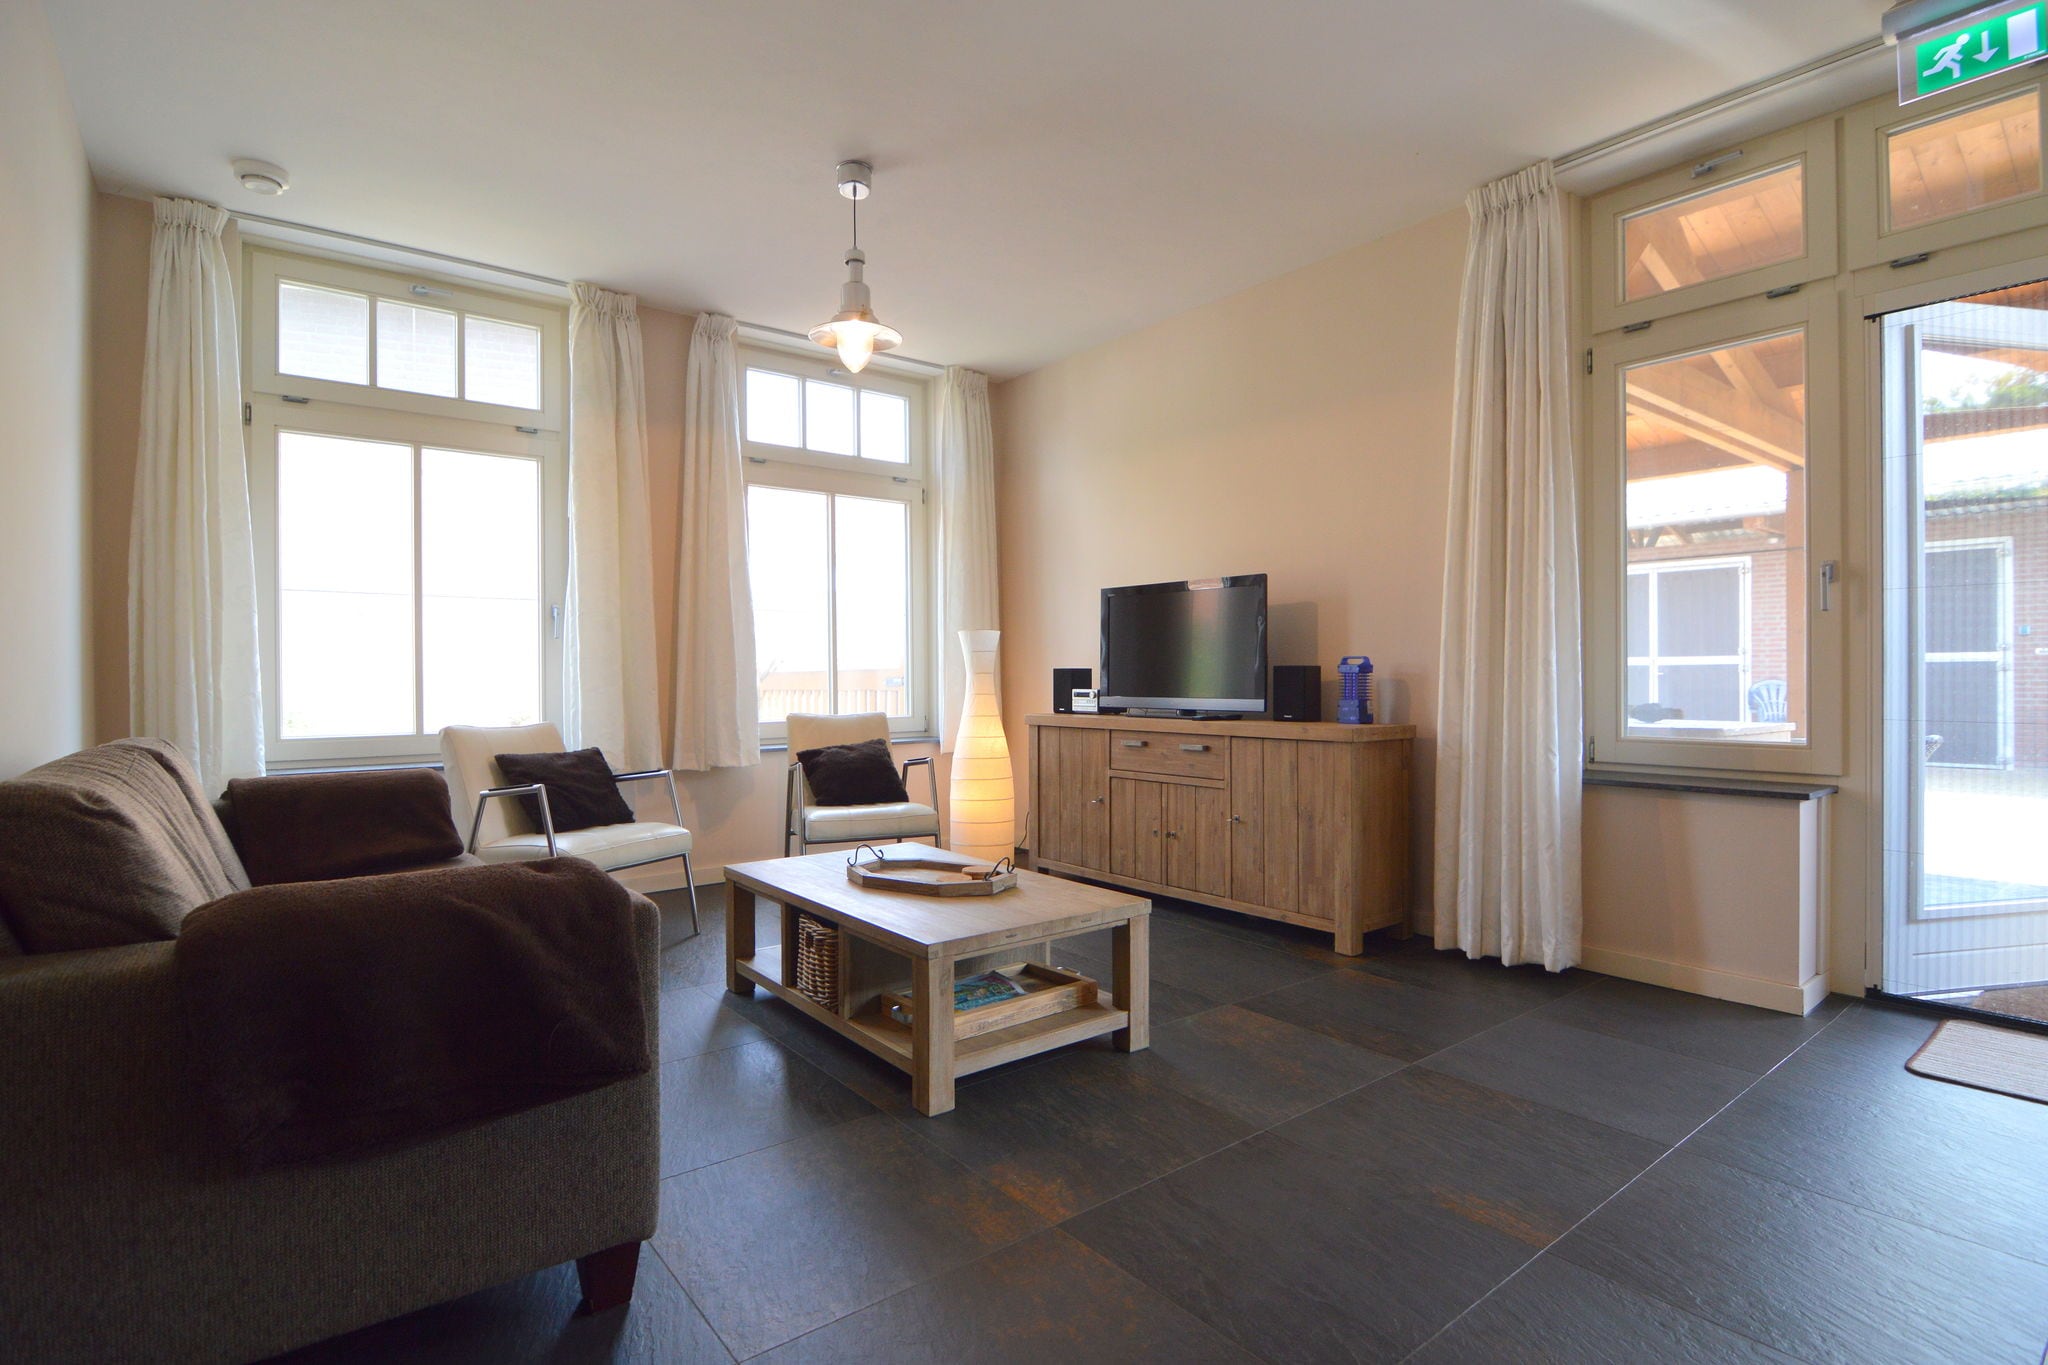 Luxury apartment in Posterholt with a terrace